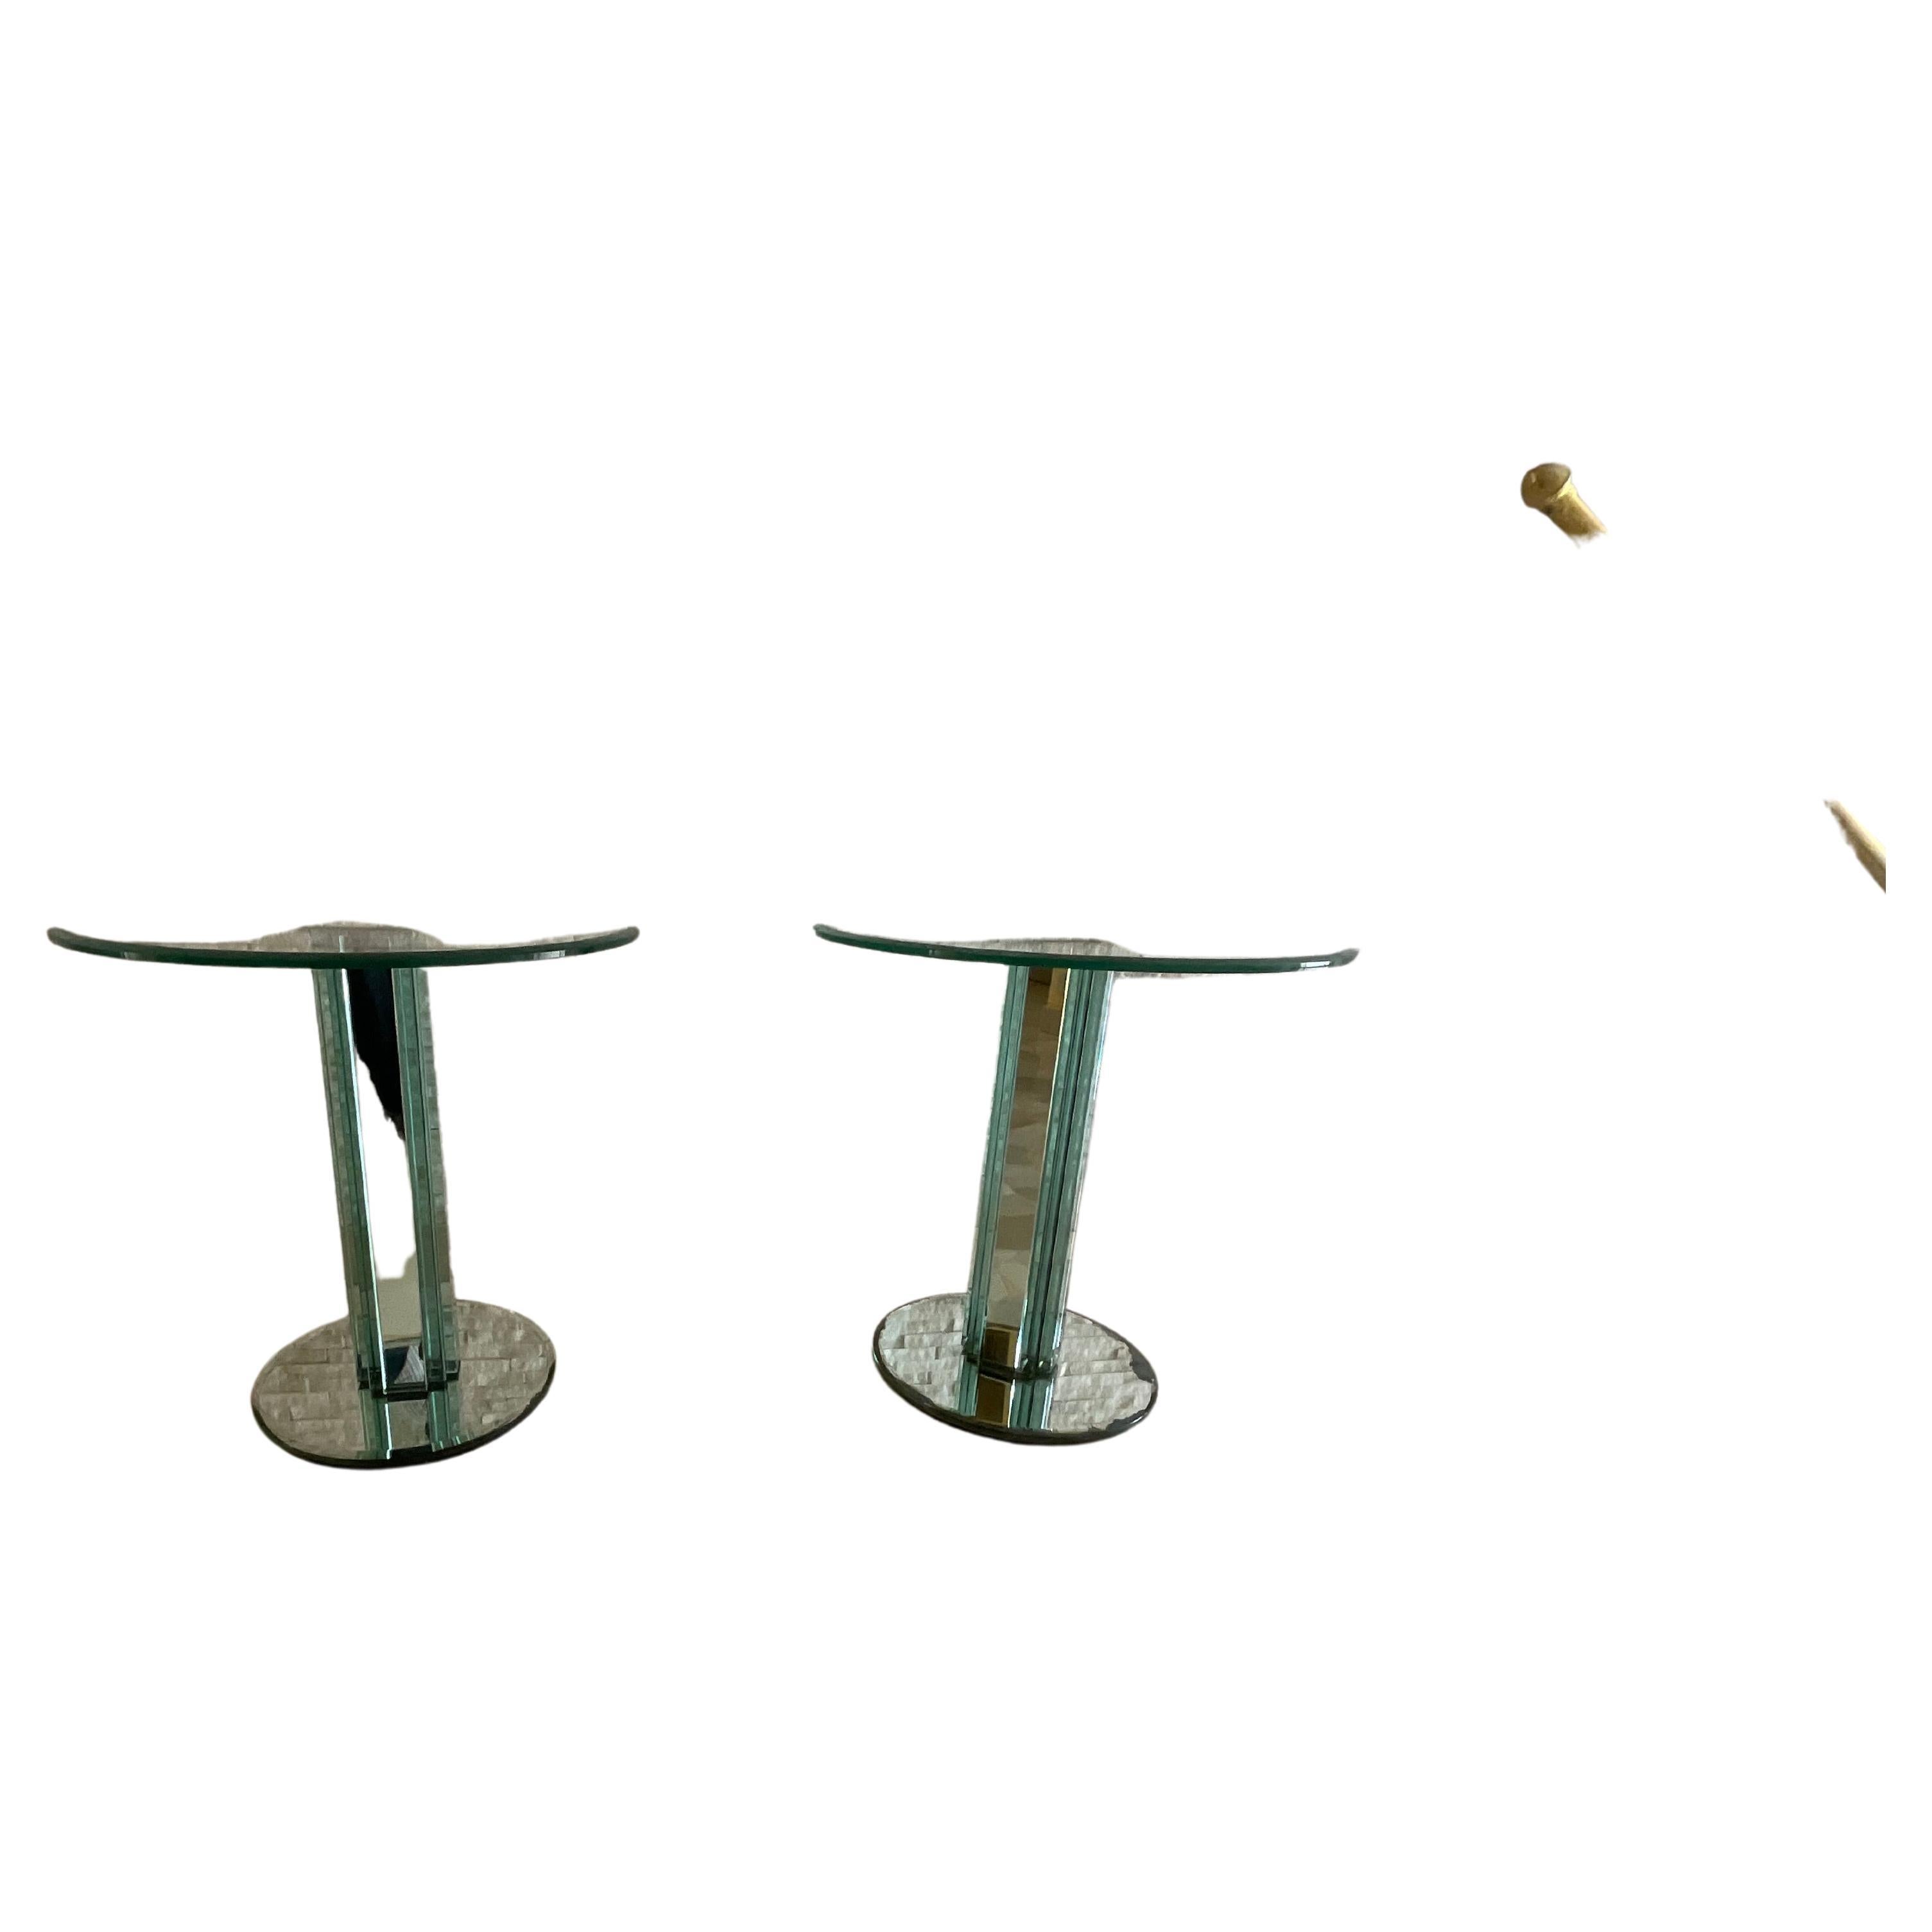 A pair of thick crystal coffee tables with excellent quality metal frame , model GOLF, designed by designer Luigi Massoni and executed by the firm Gallotti & Radice in 1980.
Moisture stains can be seen in some areas of the mirrored parts, but the